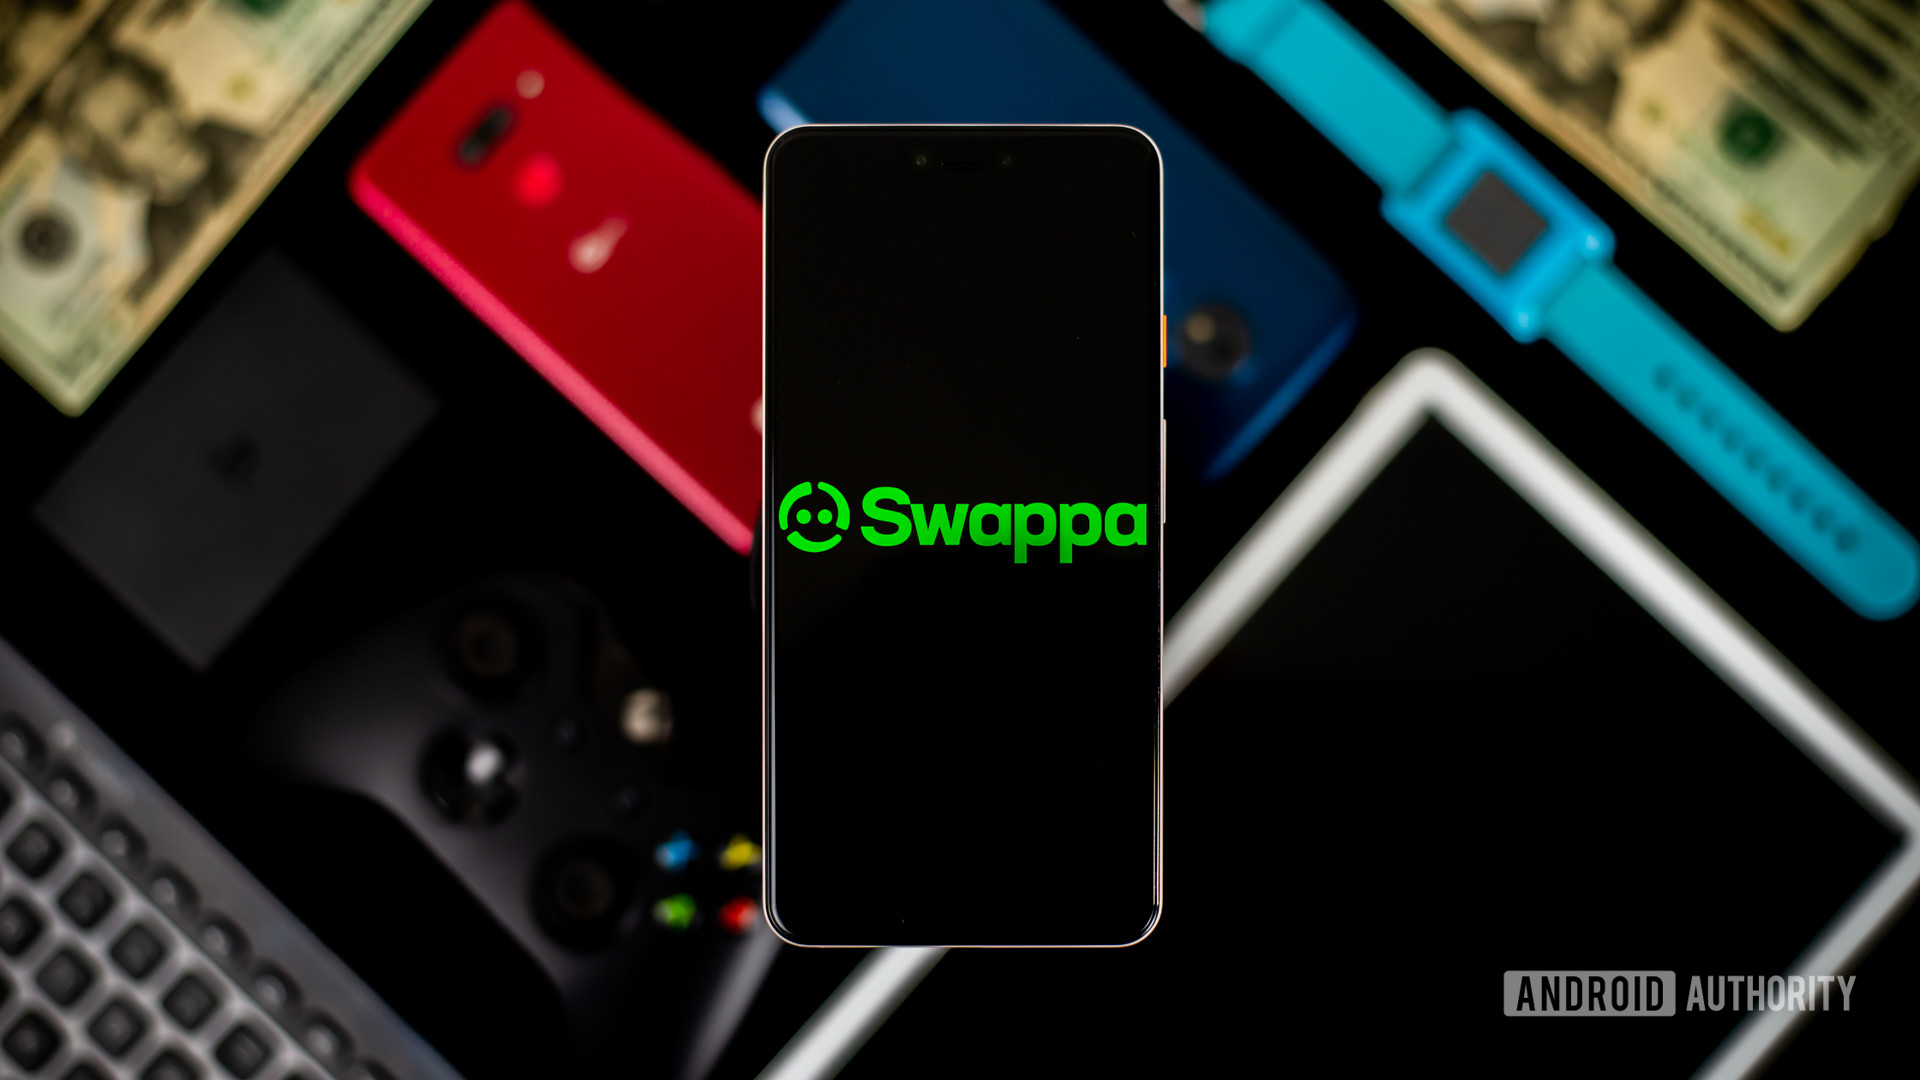 Swappa logo on smartphone with devices on background stock